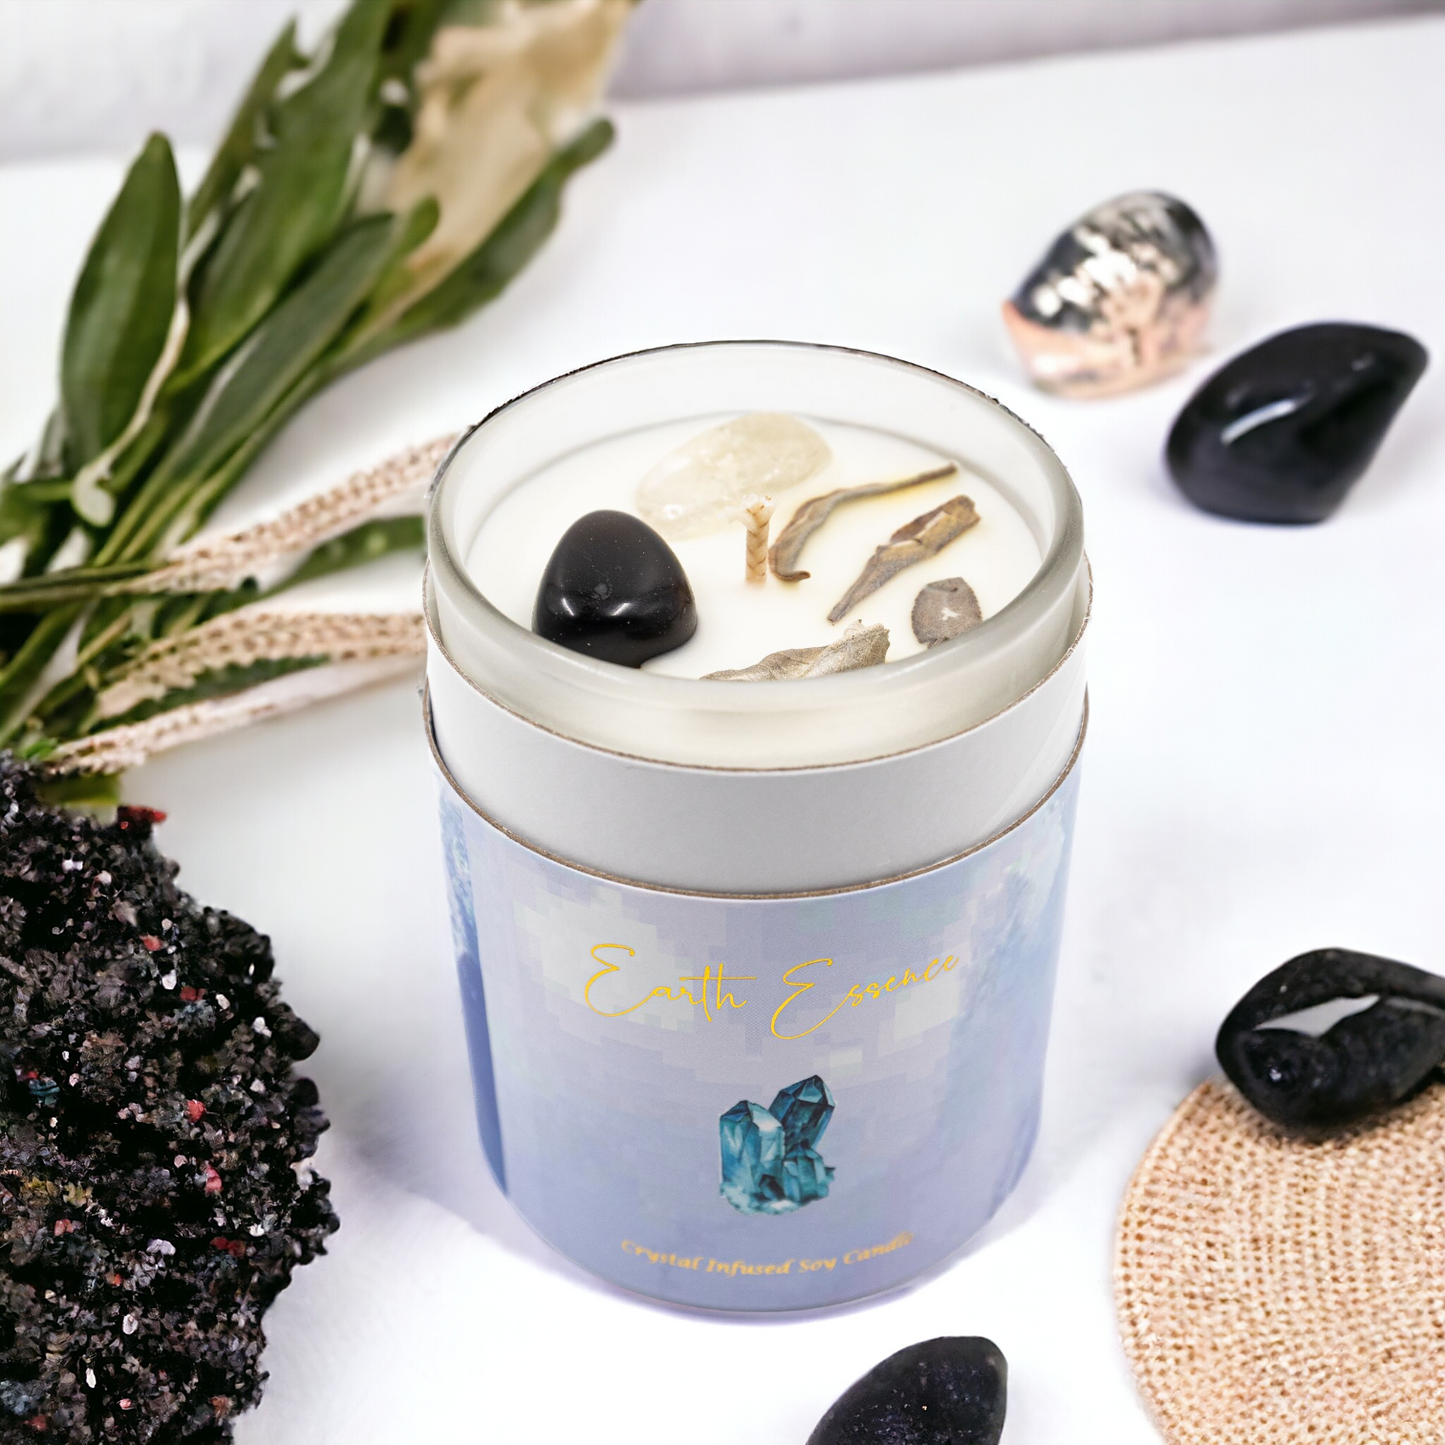 Earth Essence Crystal Soy Wax Candle - Vetiver & Patchouli